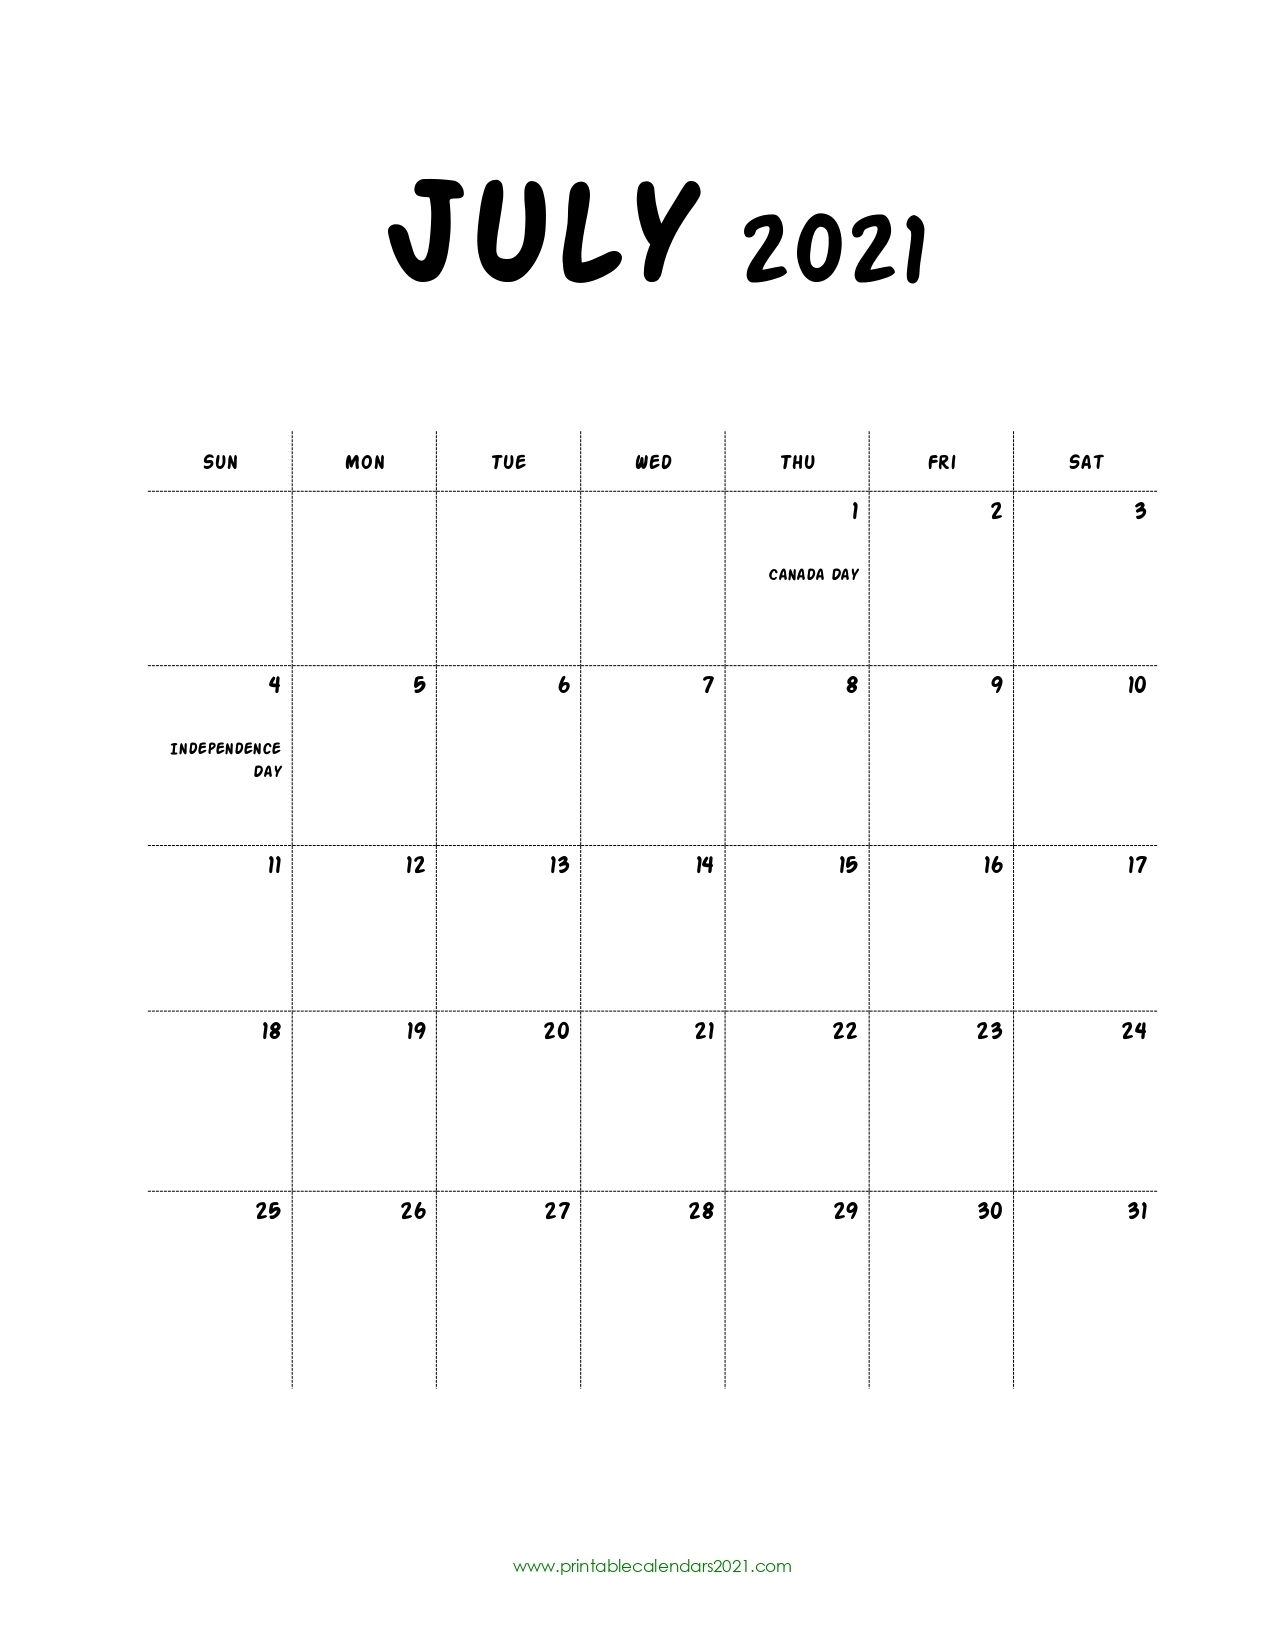 Catch Print Free July 2021 Calendar Without Downloading